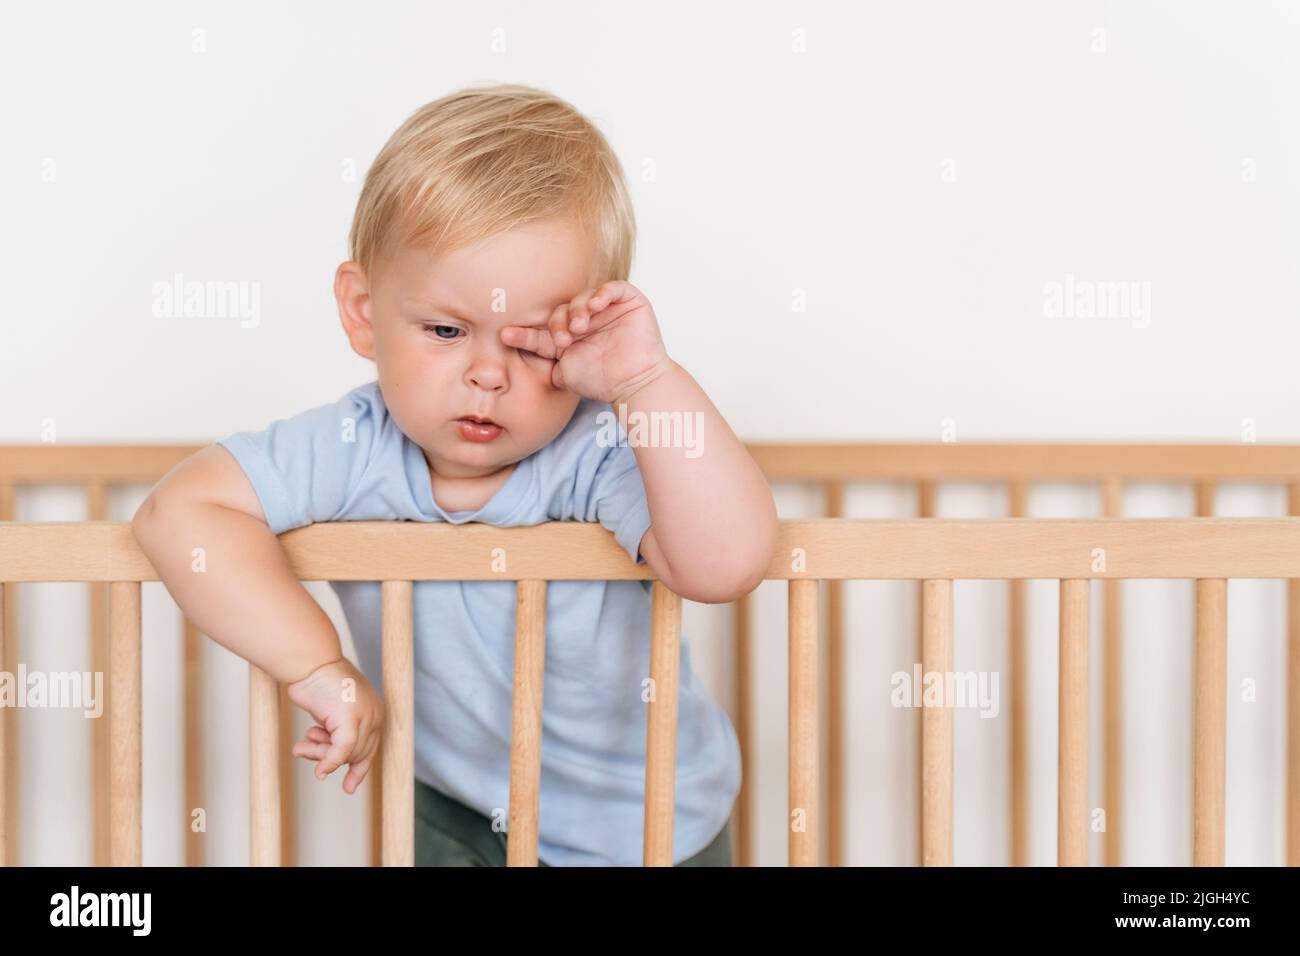 Portrait of beautiful cute little 11 months old sleepy tired baby boy in blue clothes rubbing eyes falling asleep standing in bed leaning on bumpers isolated on white background. Time to nap Stock Photo